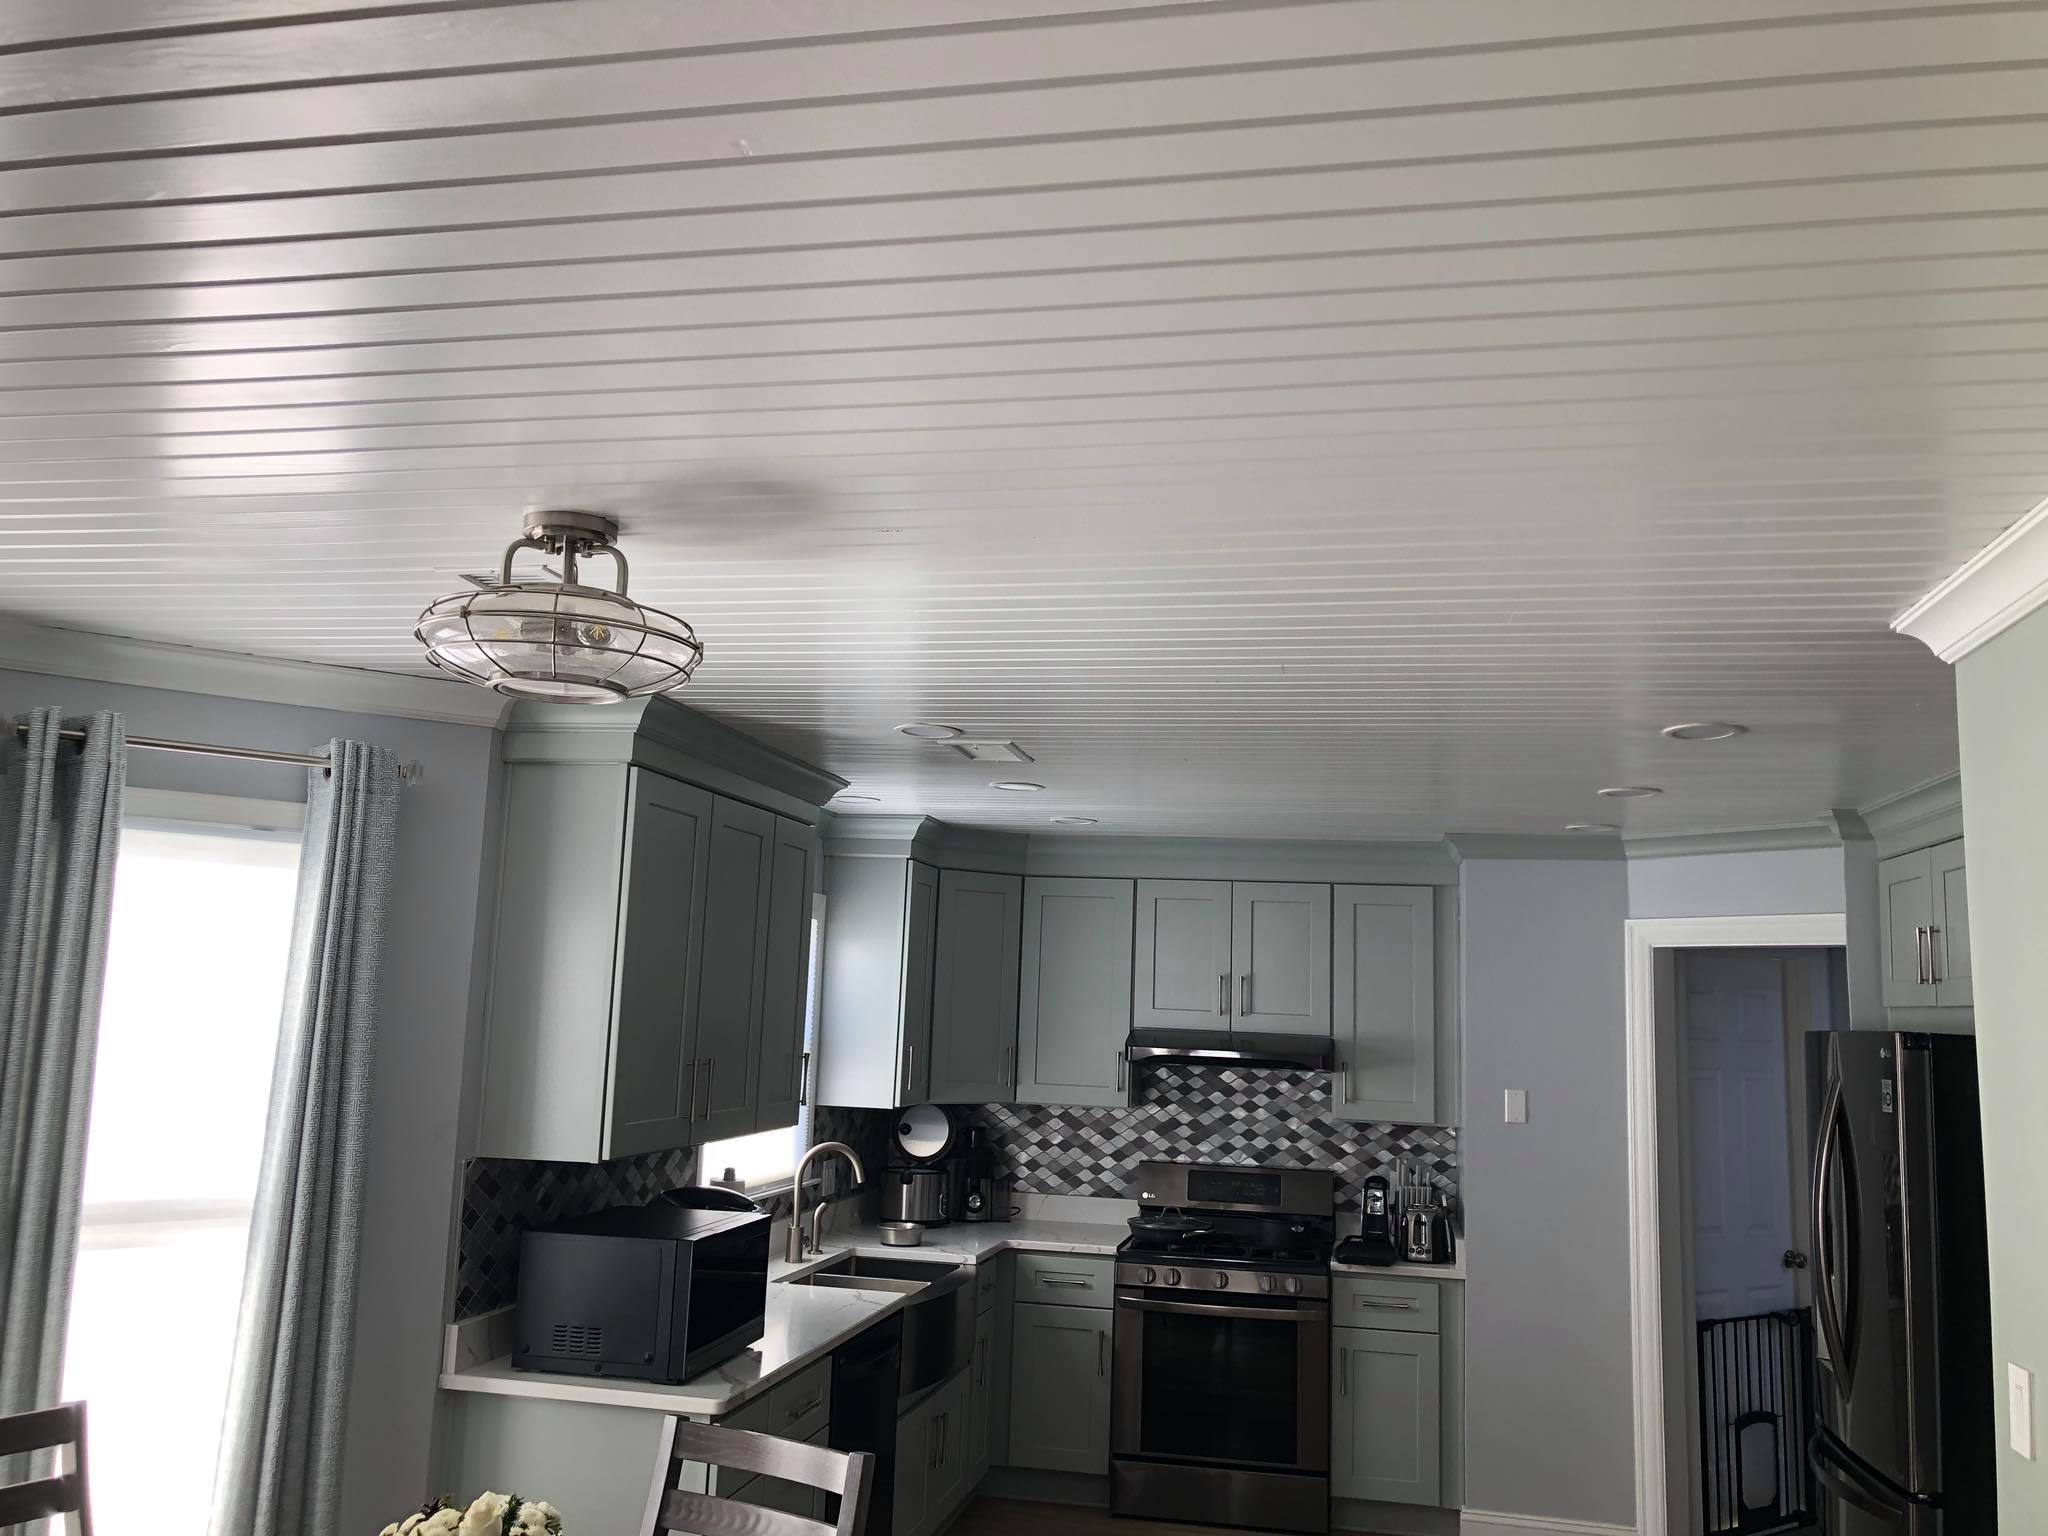 Tongue and Grove Shiplap Paneling on Ceiling Installed